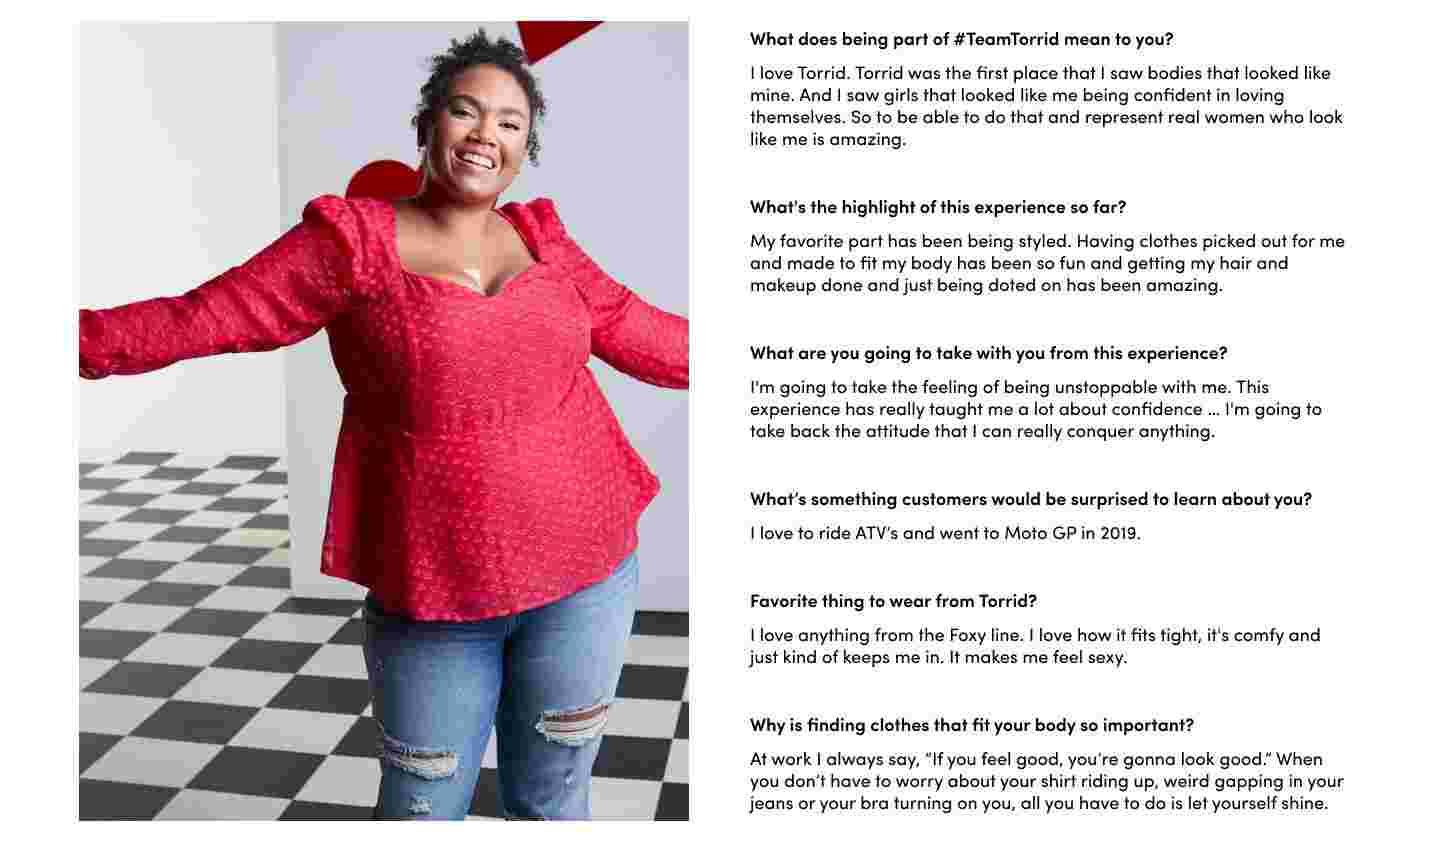 What does being part of #TeamTorrid mean to you? I love Torrid. Torrid was the first palce that I saw bodies that looked like mine. And I Saw girls that looked like me being confident in loving themselves. So to be able to do that and represent real women who look like me is amazing. What's the highlight of this experience so far? My favorite part has been being styled. Having clothes picked out for me and make to fit my body has been so fun and getting my hair and make up done and just being doted on has been amazing. What are you going to take with you from this experience? I'm going to take the feeling of being unstoppable with me. This experience has really taought me a lot about confidence ... I'm going to take back the attitude that I can really conquer anything. What's something customers would be surprised to learn about you? I love to ride ATV's and went to MotoGP in 2019. Favorite thing to wear from Torrid? I love anything from the Foxy lin. I love how it fits tight, it's comfy and just kind of keeps me in. It make me feel sexy. Why is finding clothes that fit your body so important? At work I always say, 'If you feel good, you're gonna look good.' When you don't have to worry about your shirt riding up, weird gapping in your jeans or your bra turning on you, all you have to do is let yourself shine.